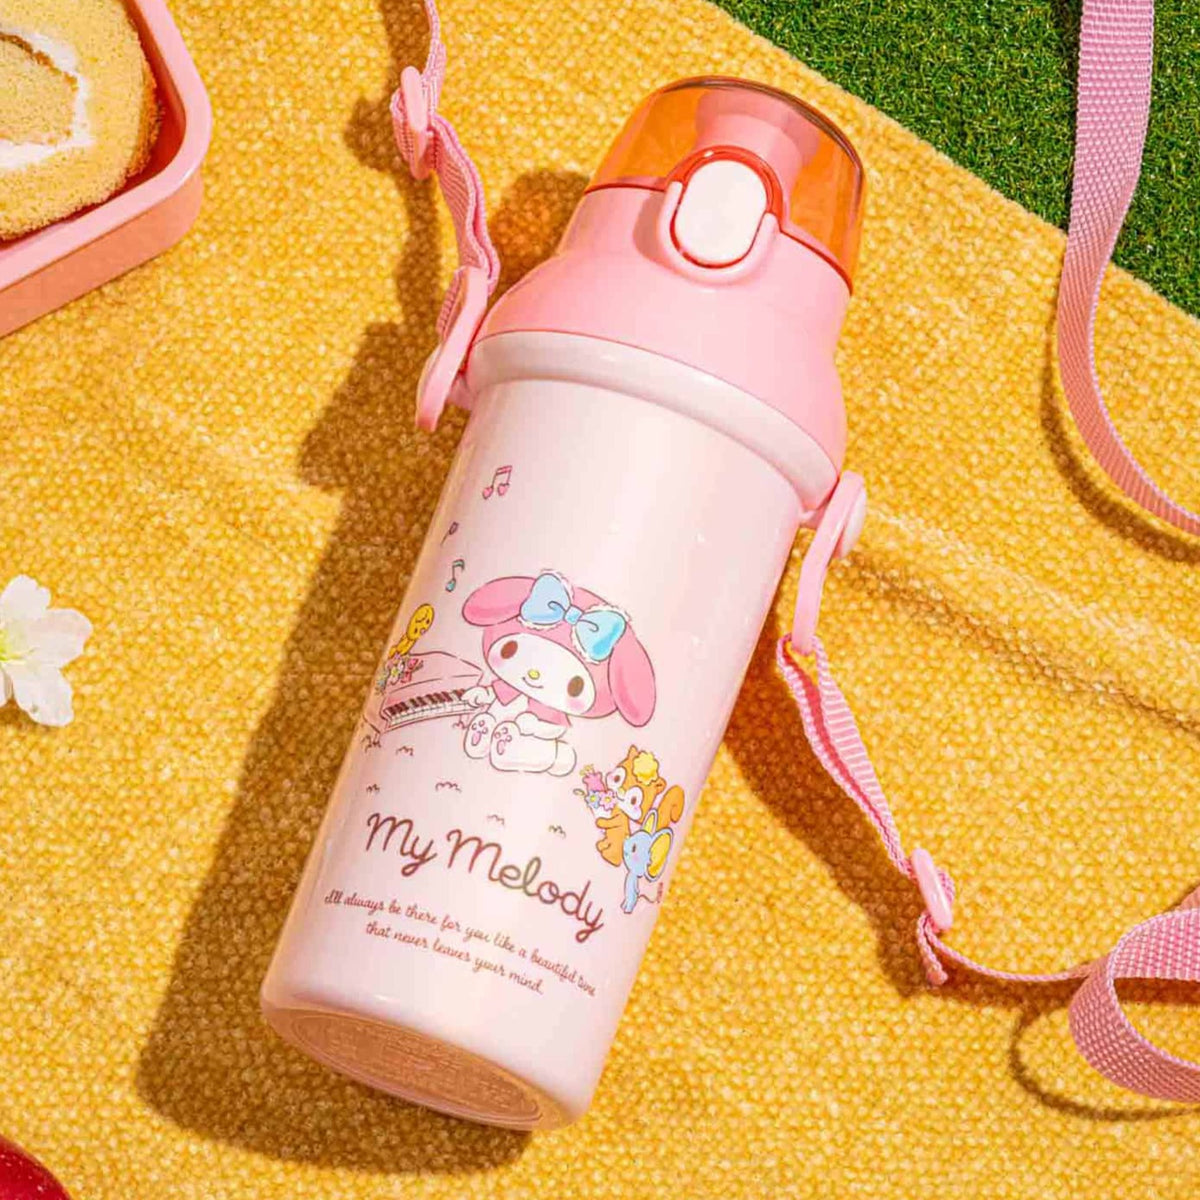 My Melody Packable Water Bottle Home Goods CLEVER IDIOTS   